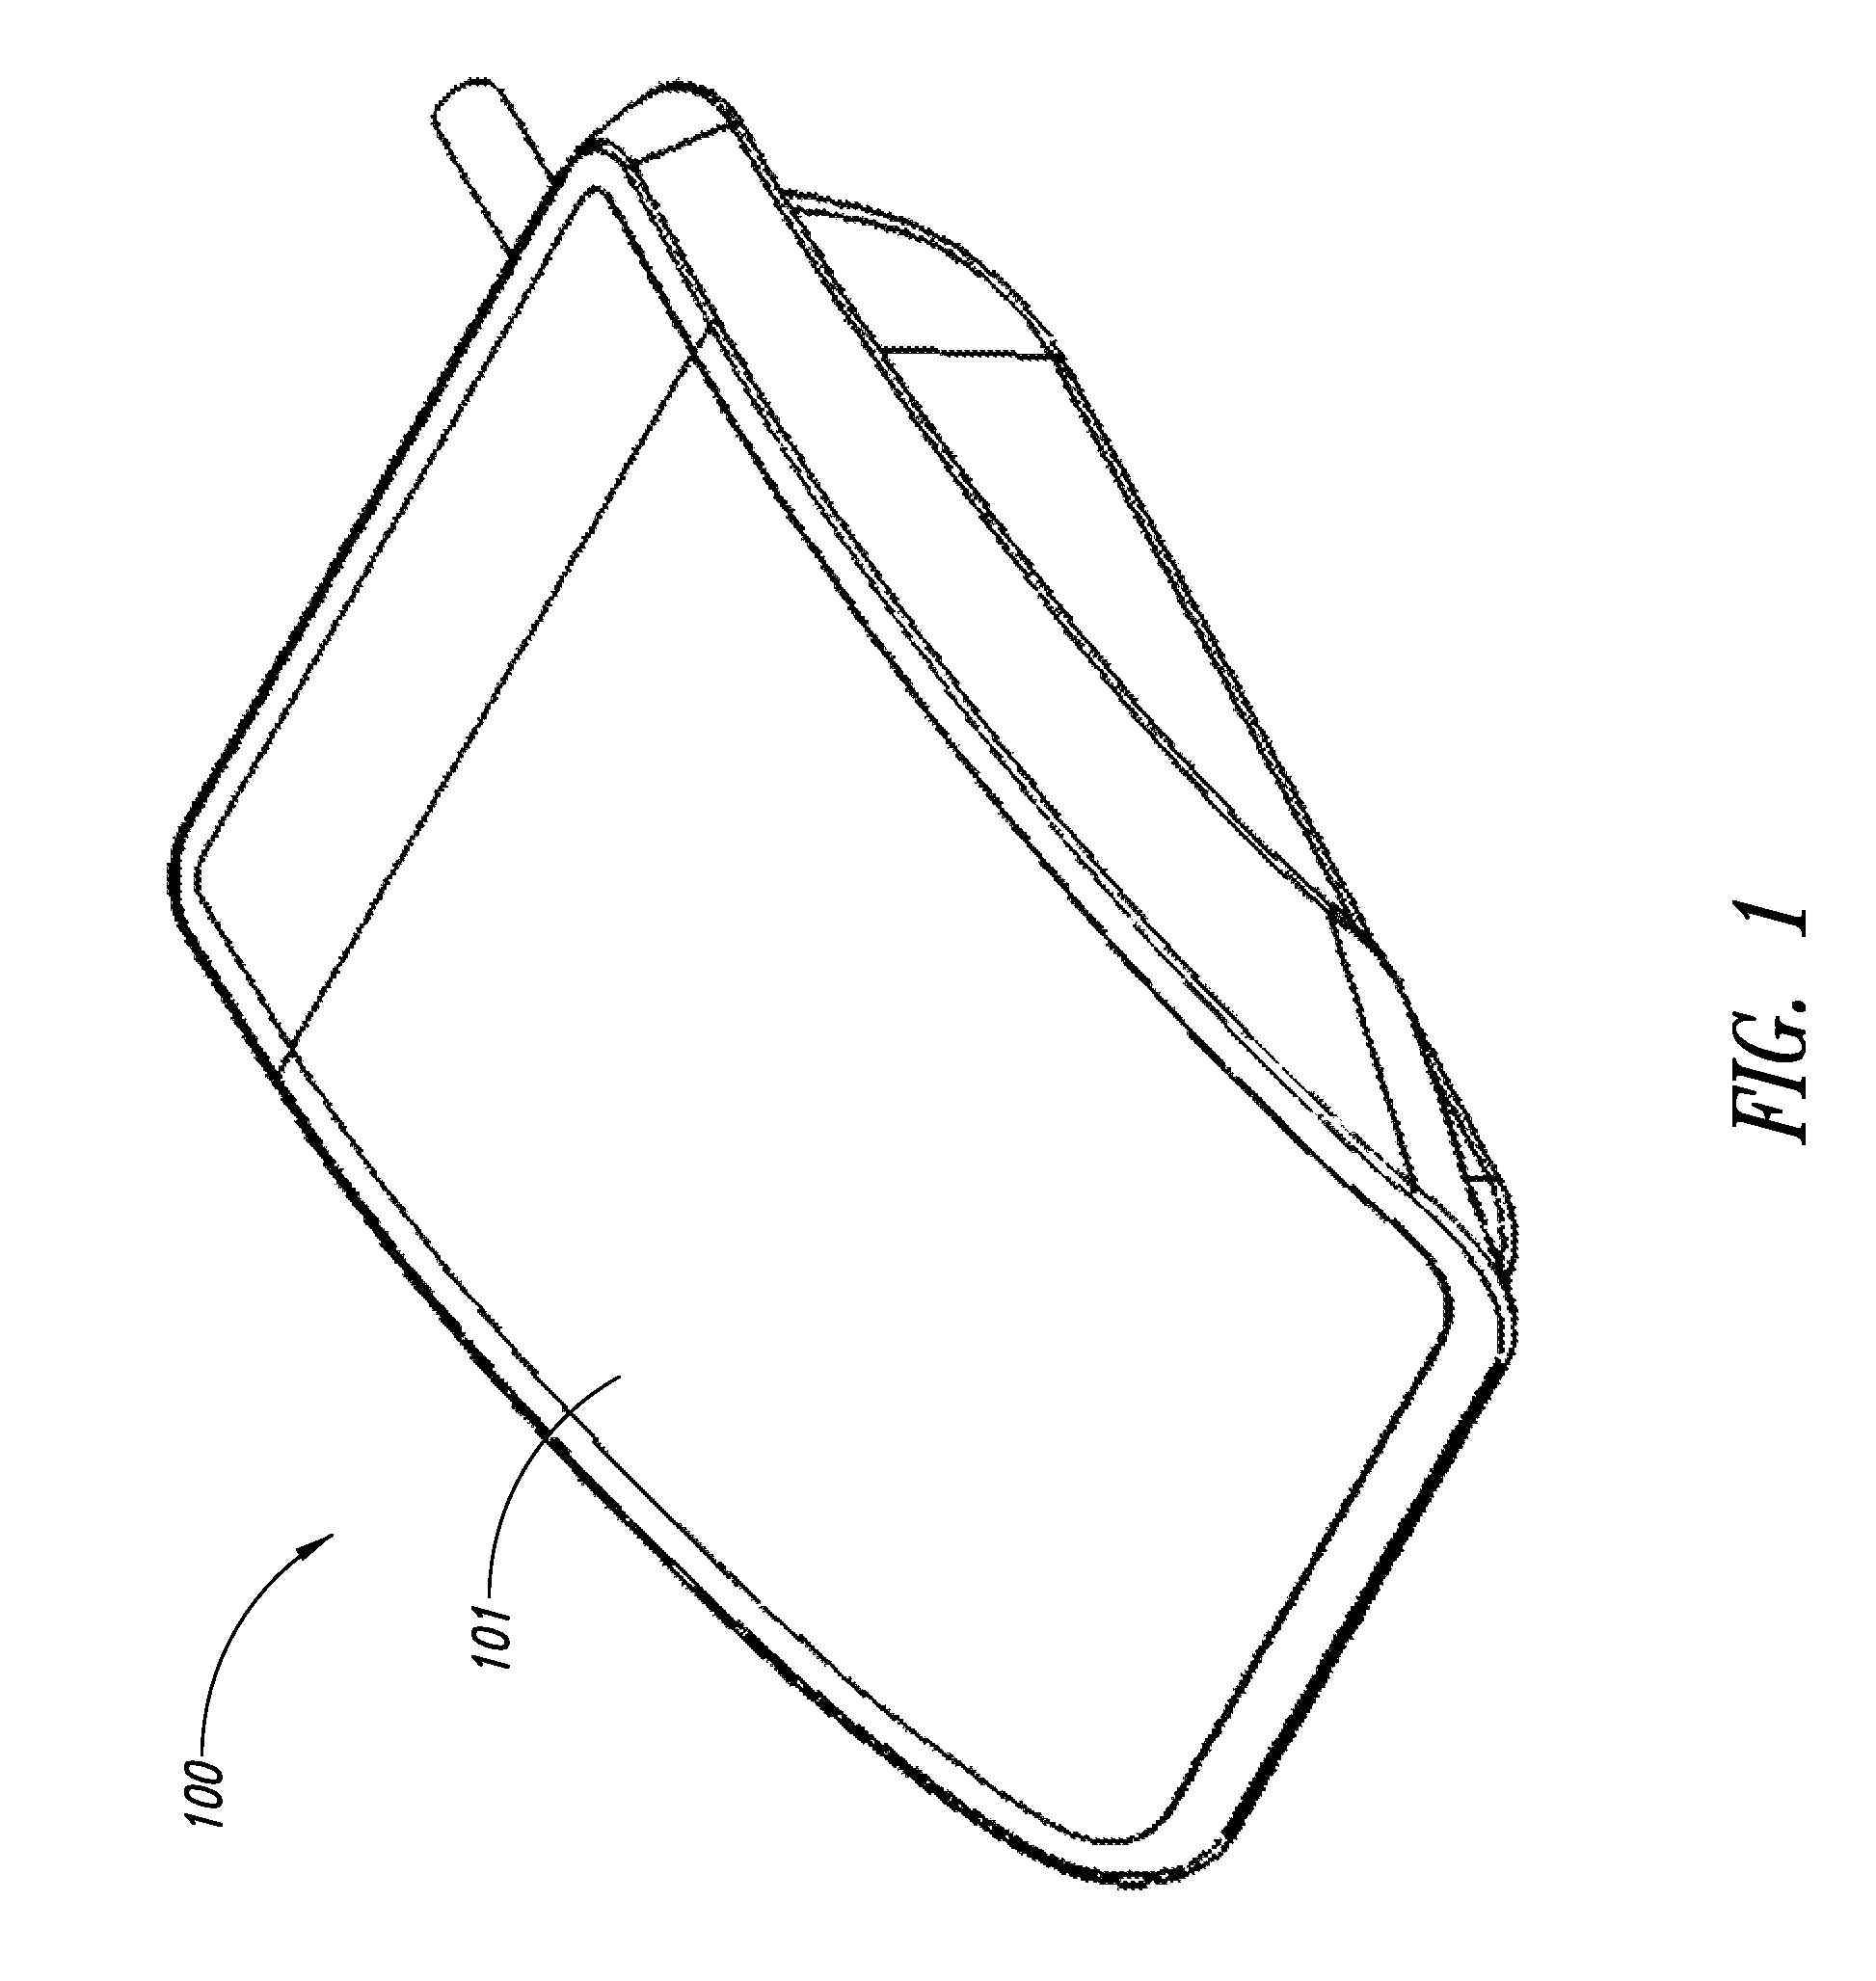 Computer peripheral with removable active element cartridge